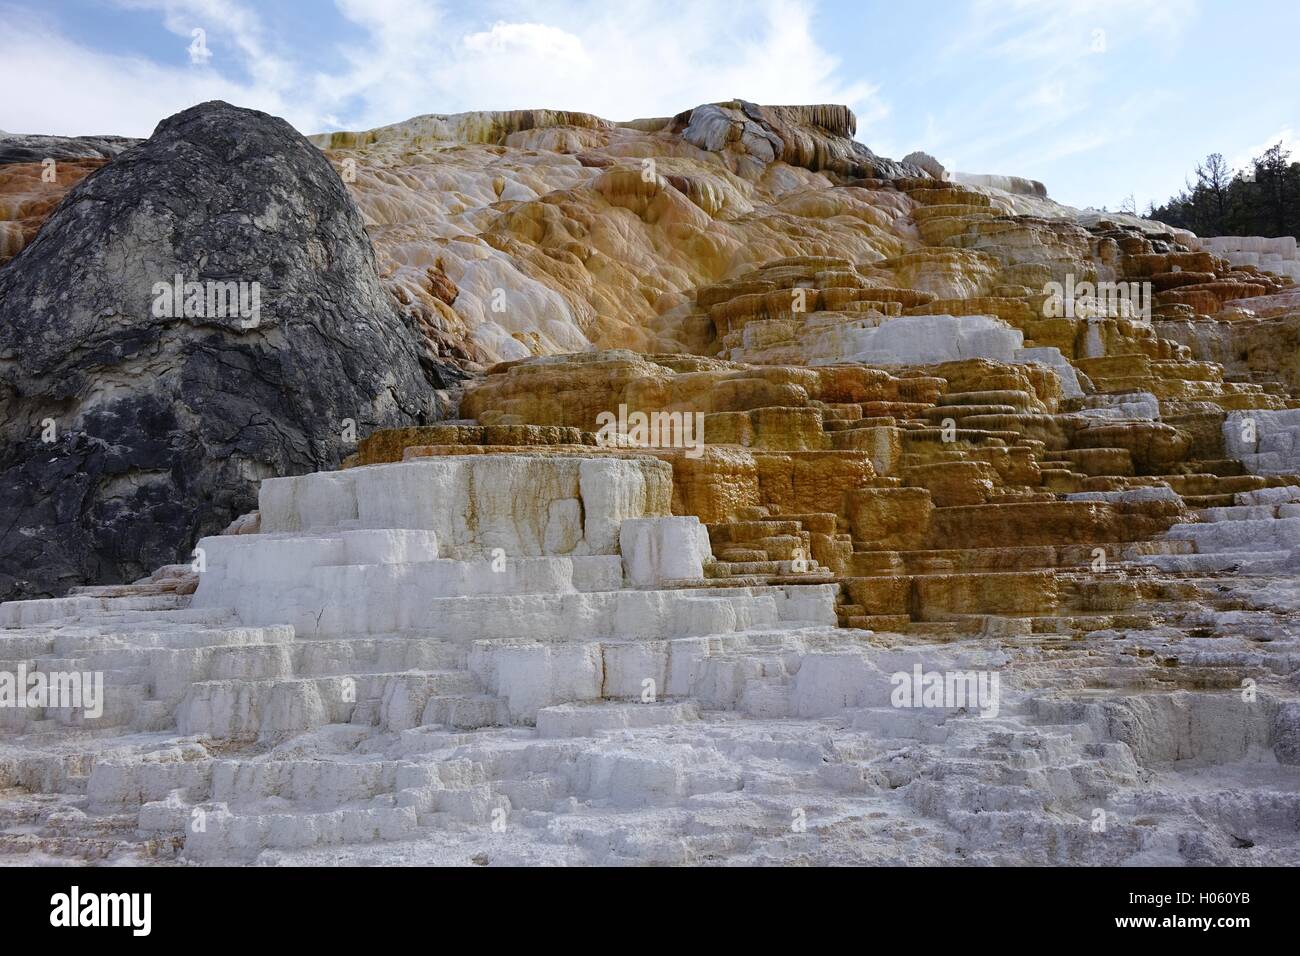 Travertine deposits from hot springs, lower terraces at Mammoth Hot Springs, Yellowstone National Park Stock Photo